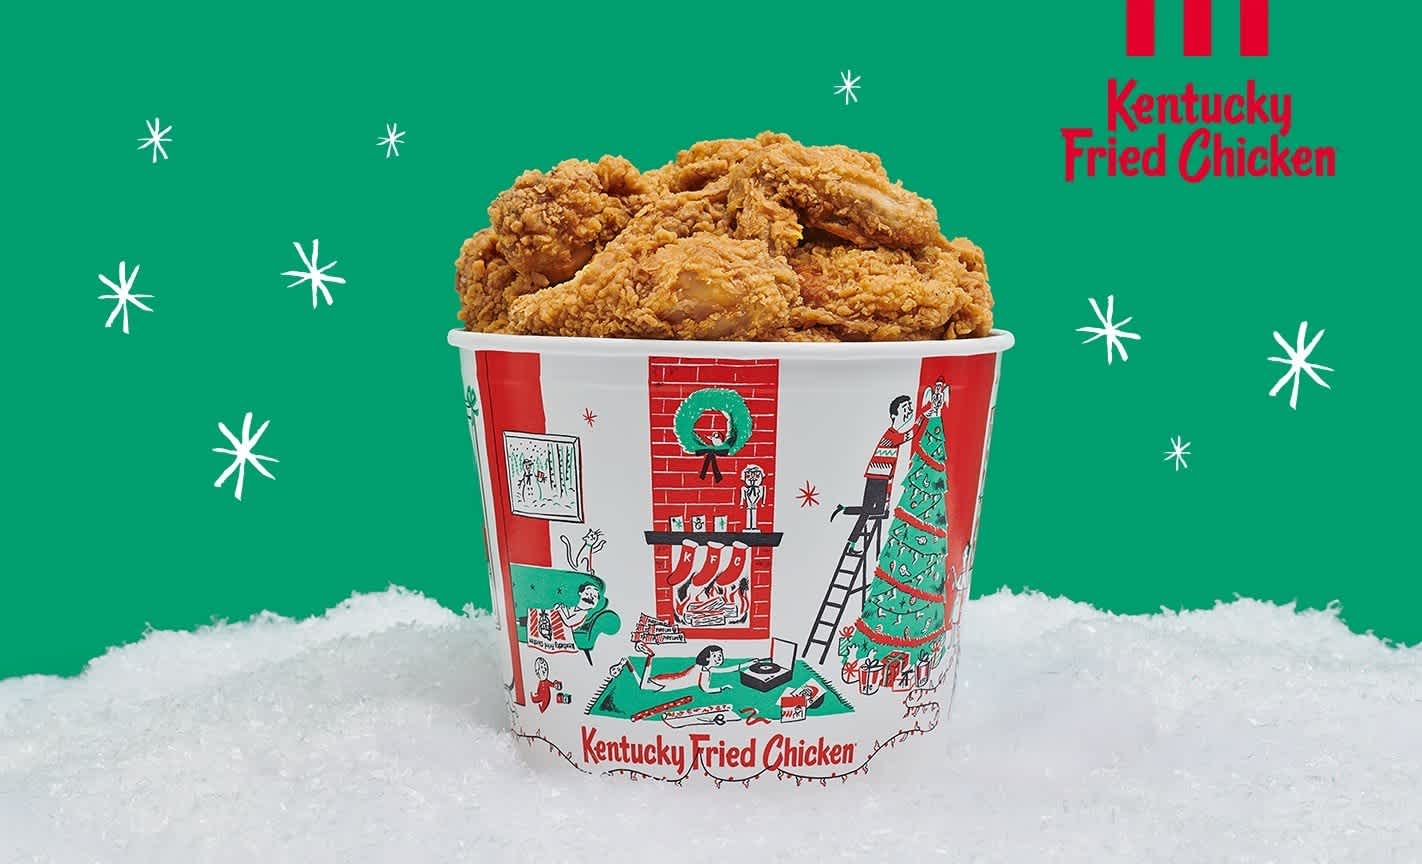 KFC GETS IN THE HOLIDAY SPIRIT WITH LIMITEDEDITION HOLIDAY BUCKETS AND